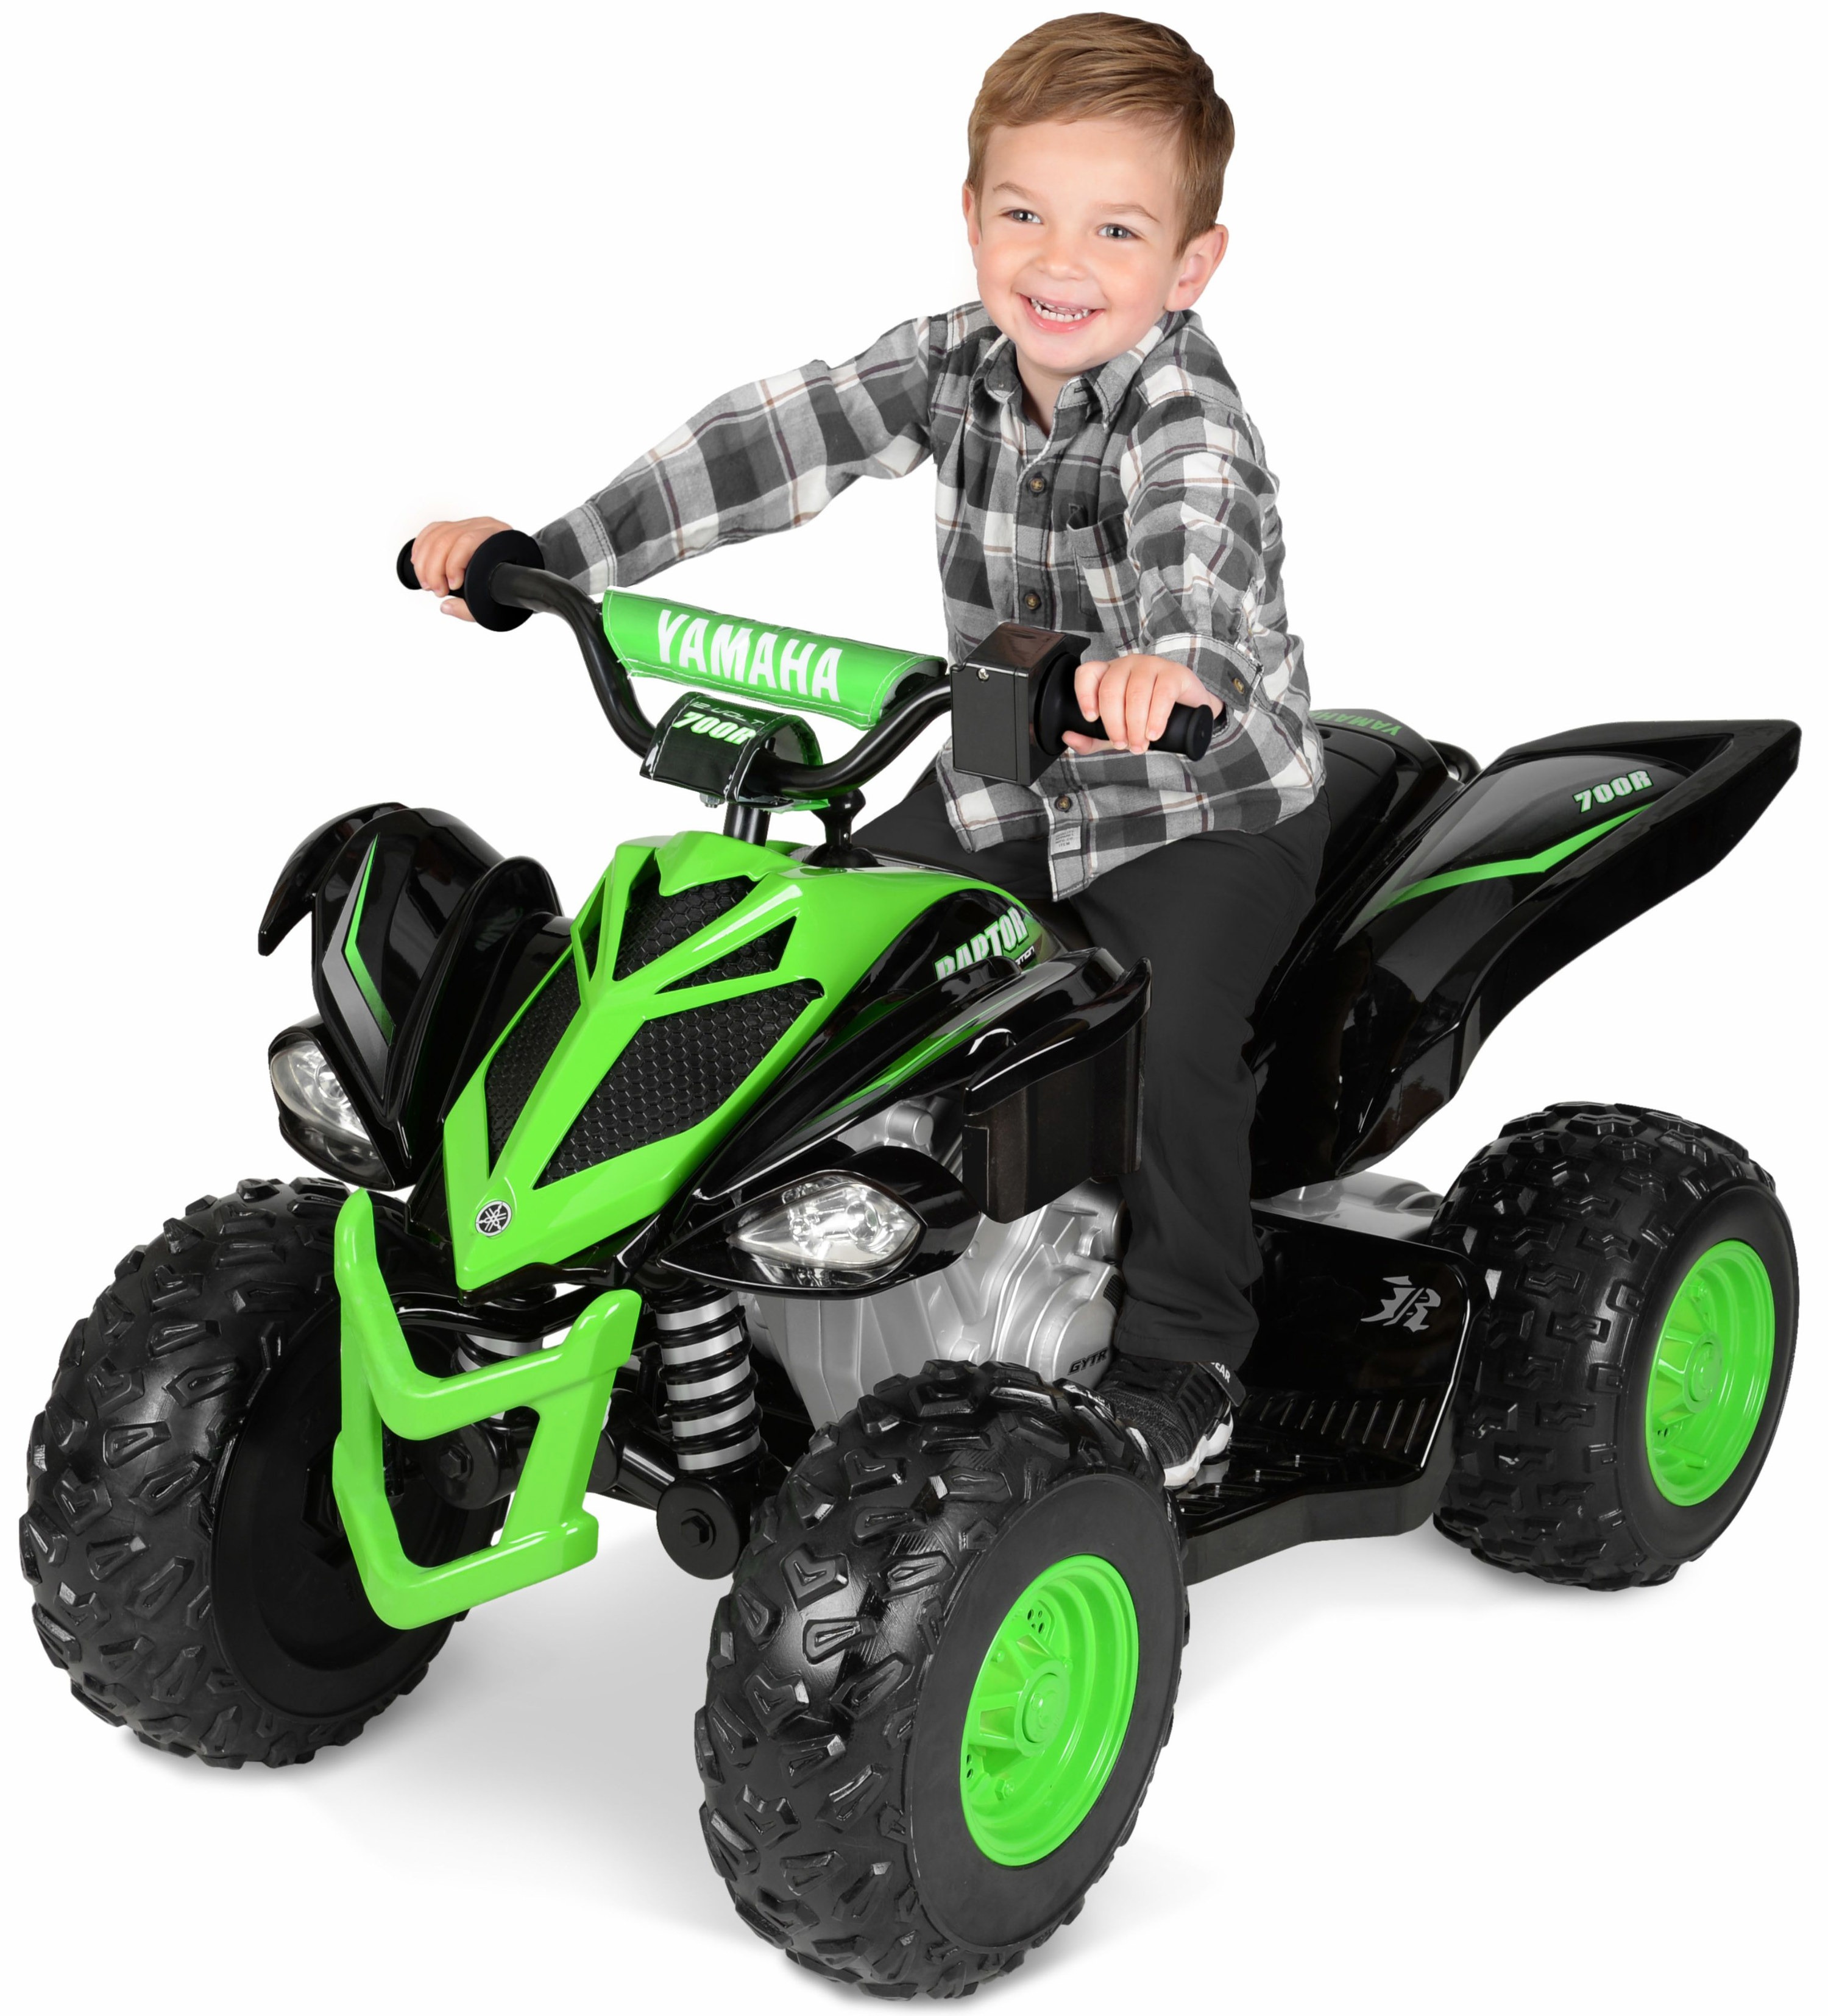 A child riding the green toy